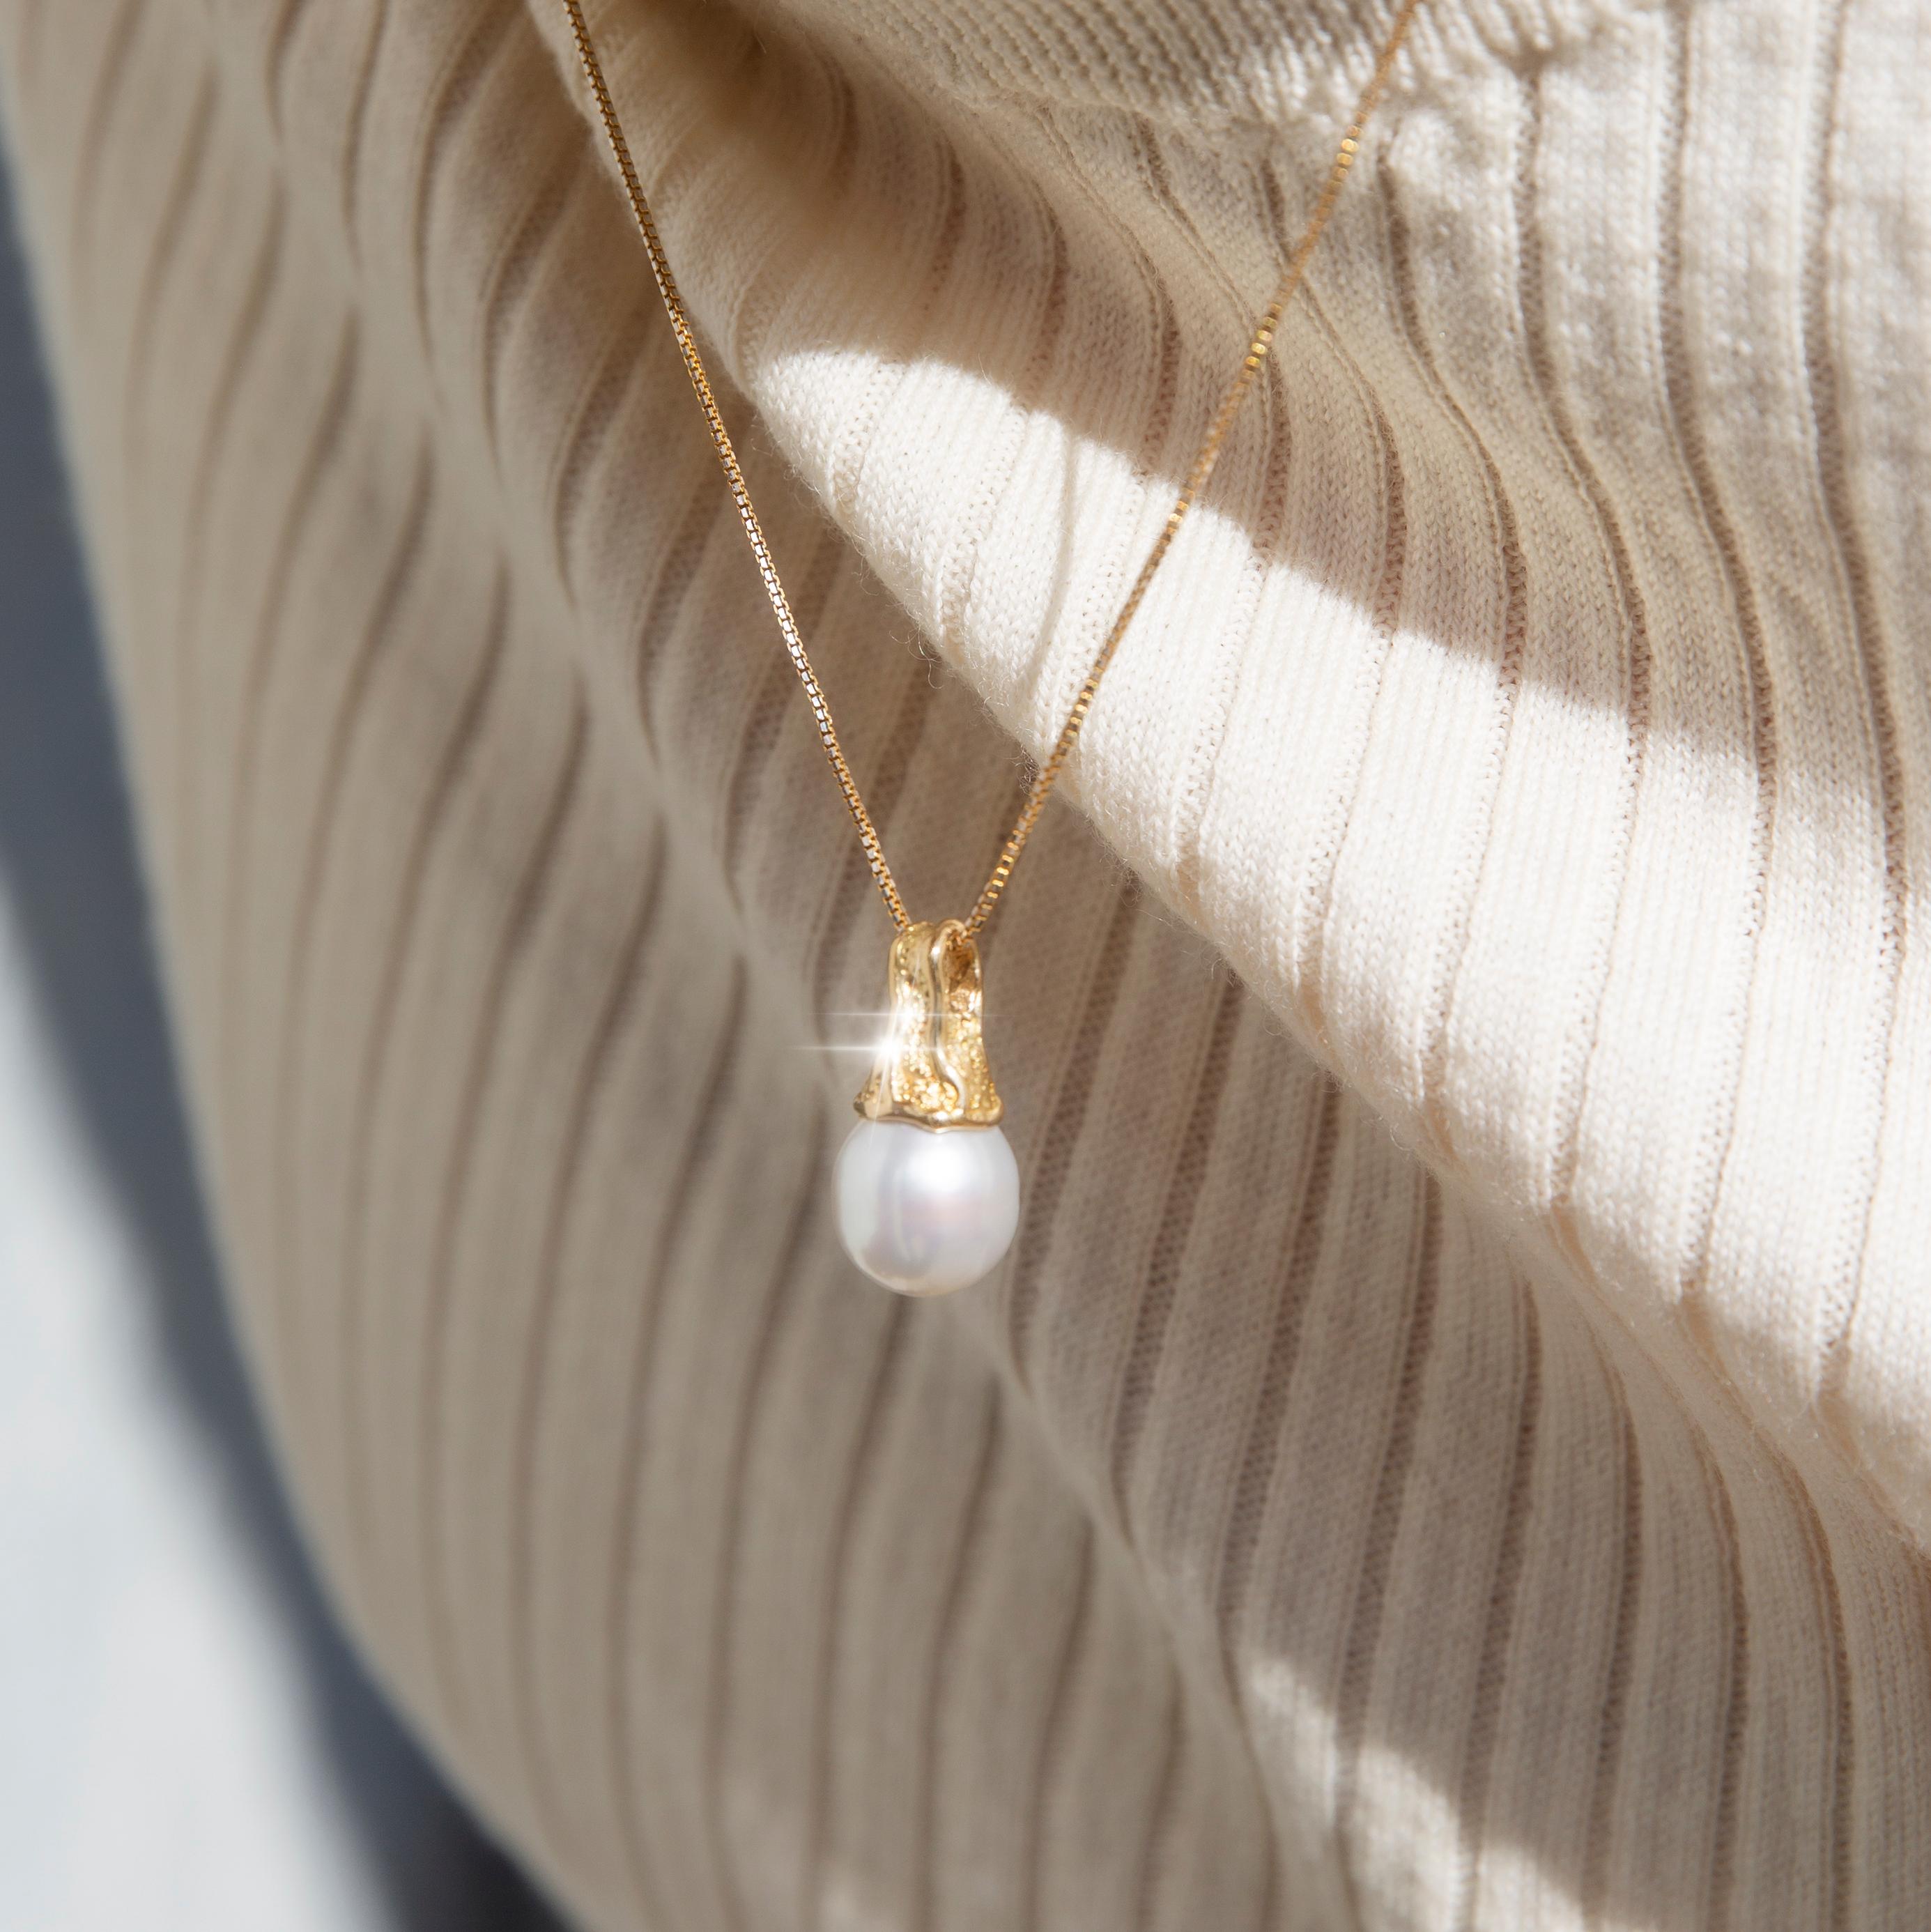 Cabochon Vintage Circa 1980s South Sea Pearl Pendant & Chain 18 Carat Yellow Gold For Sale